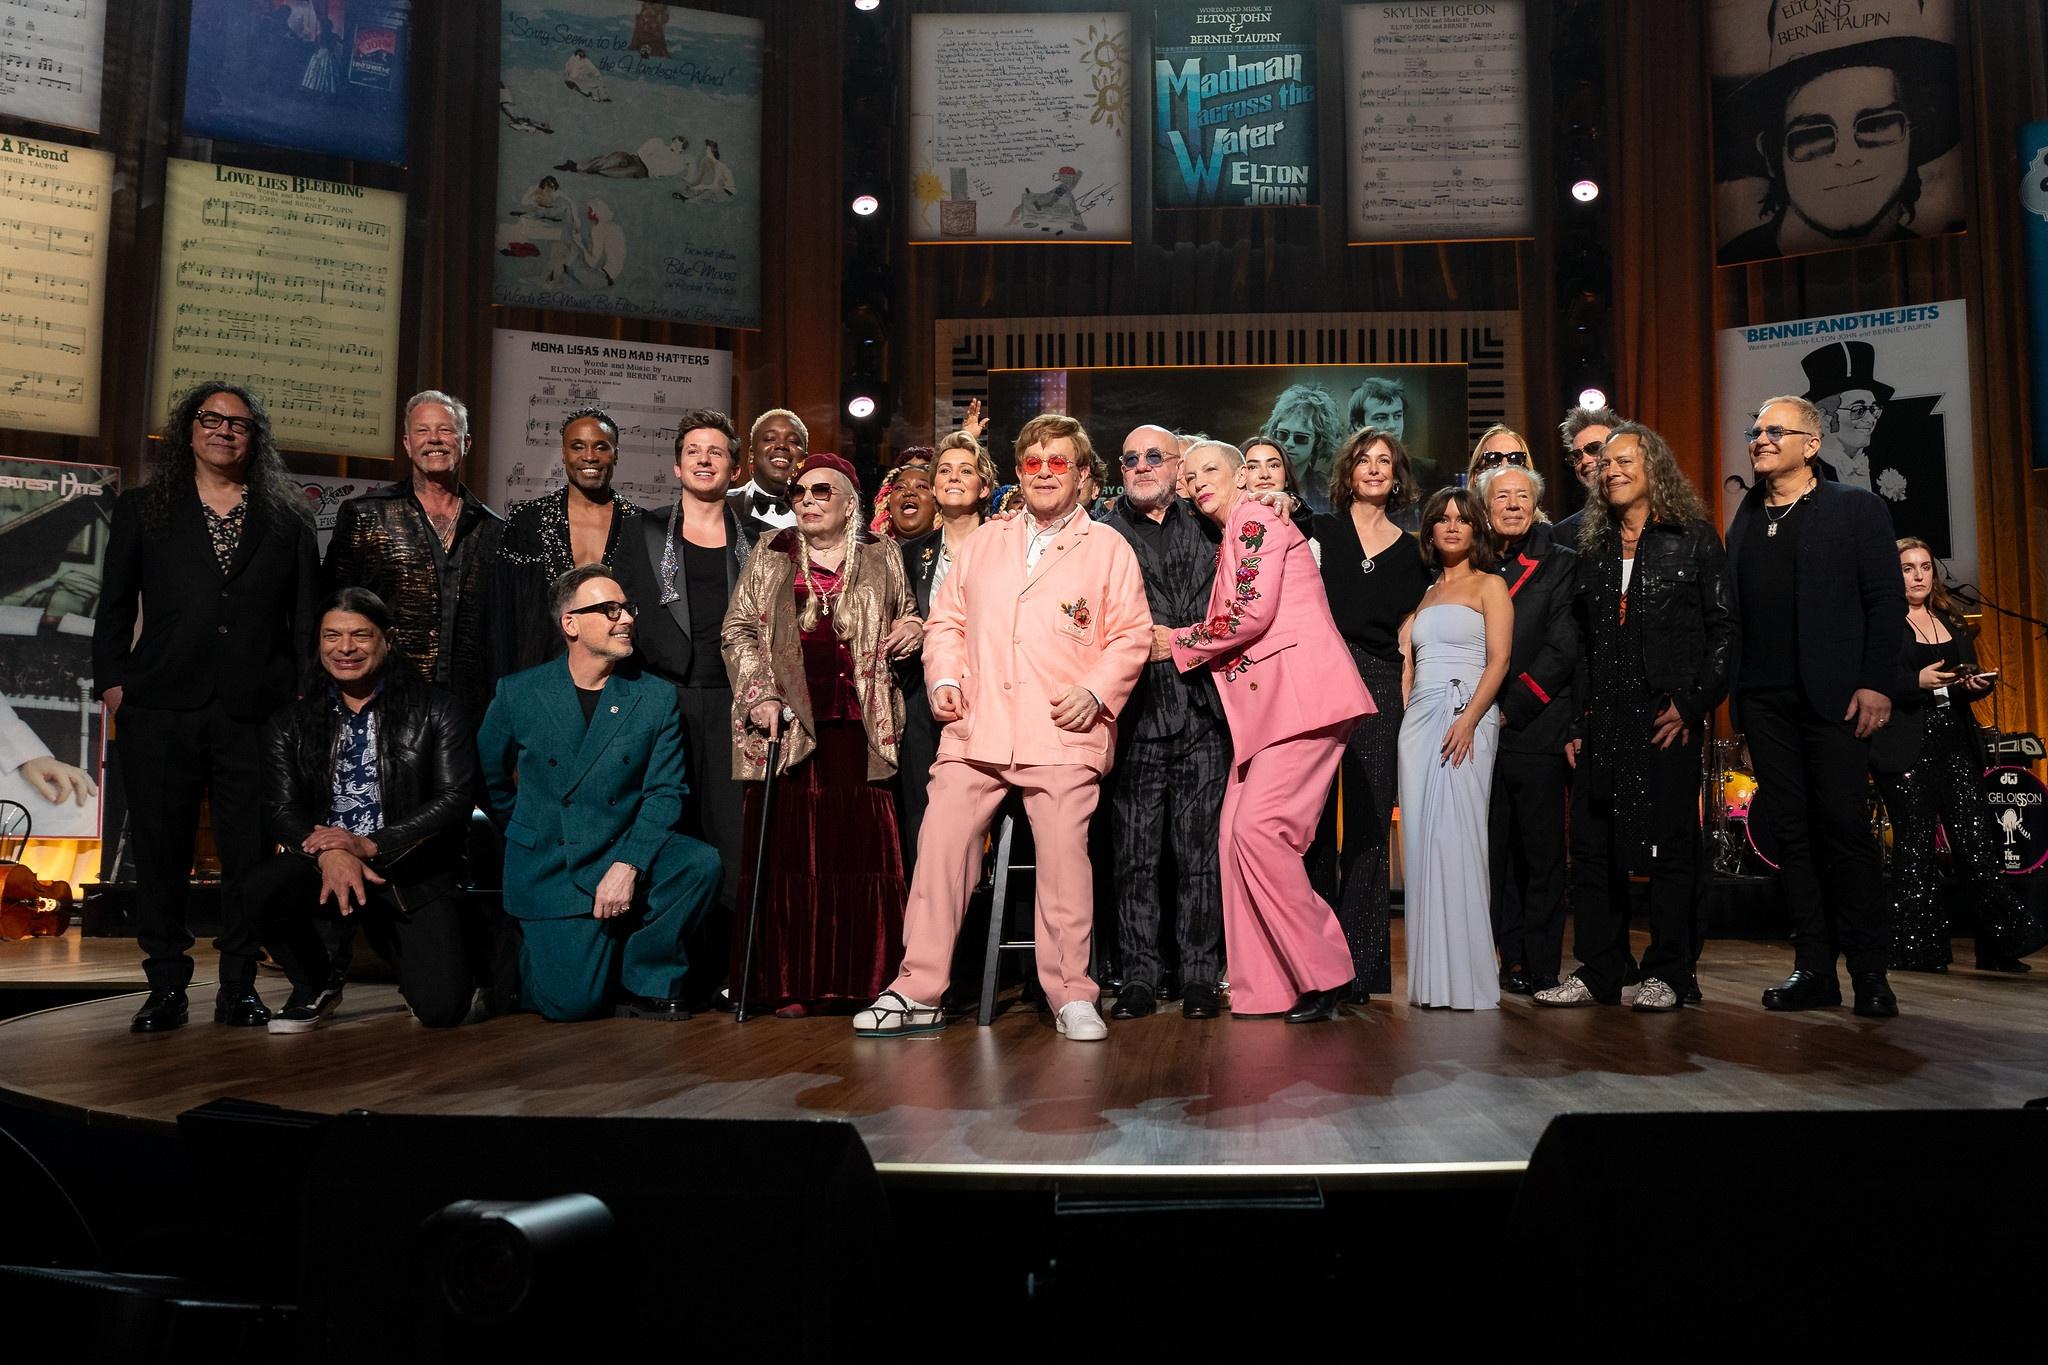 Elton John in pink suit and Bernie Taupin surrounded by cast of other entertainers